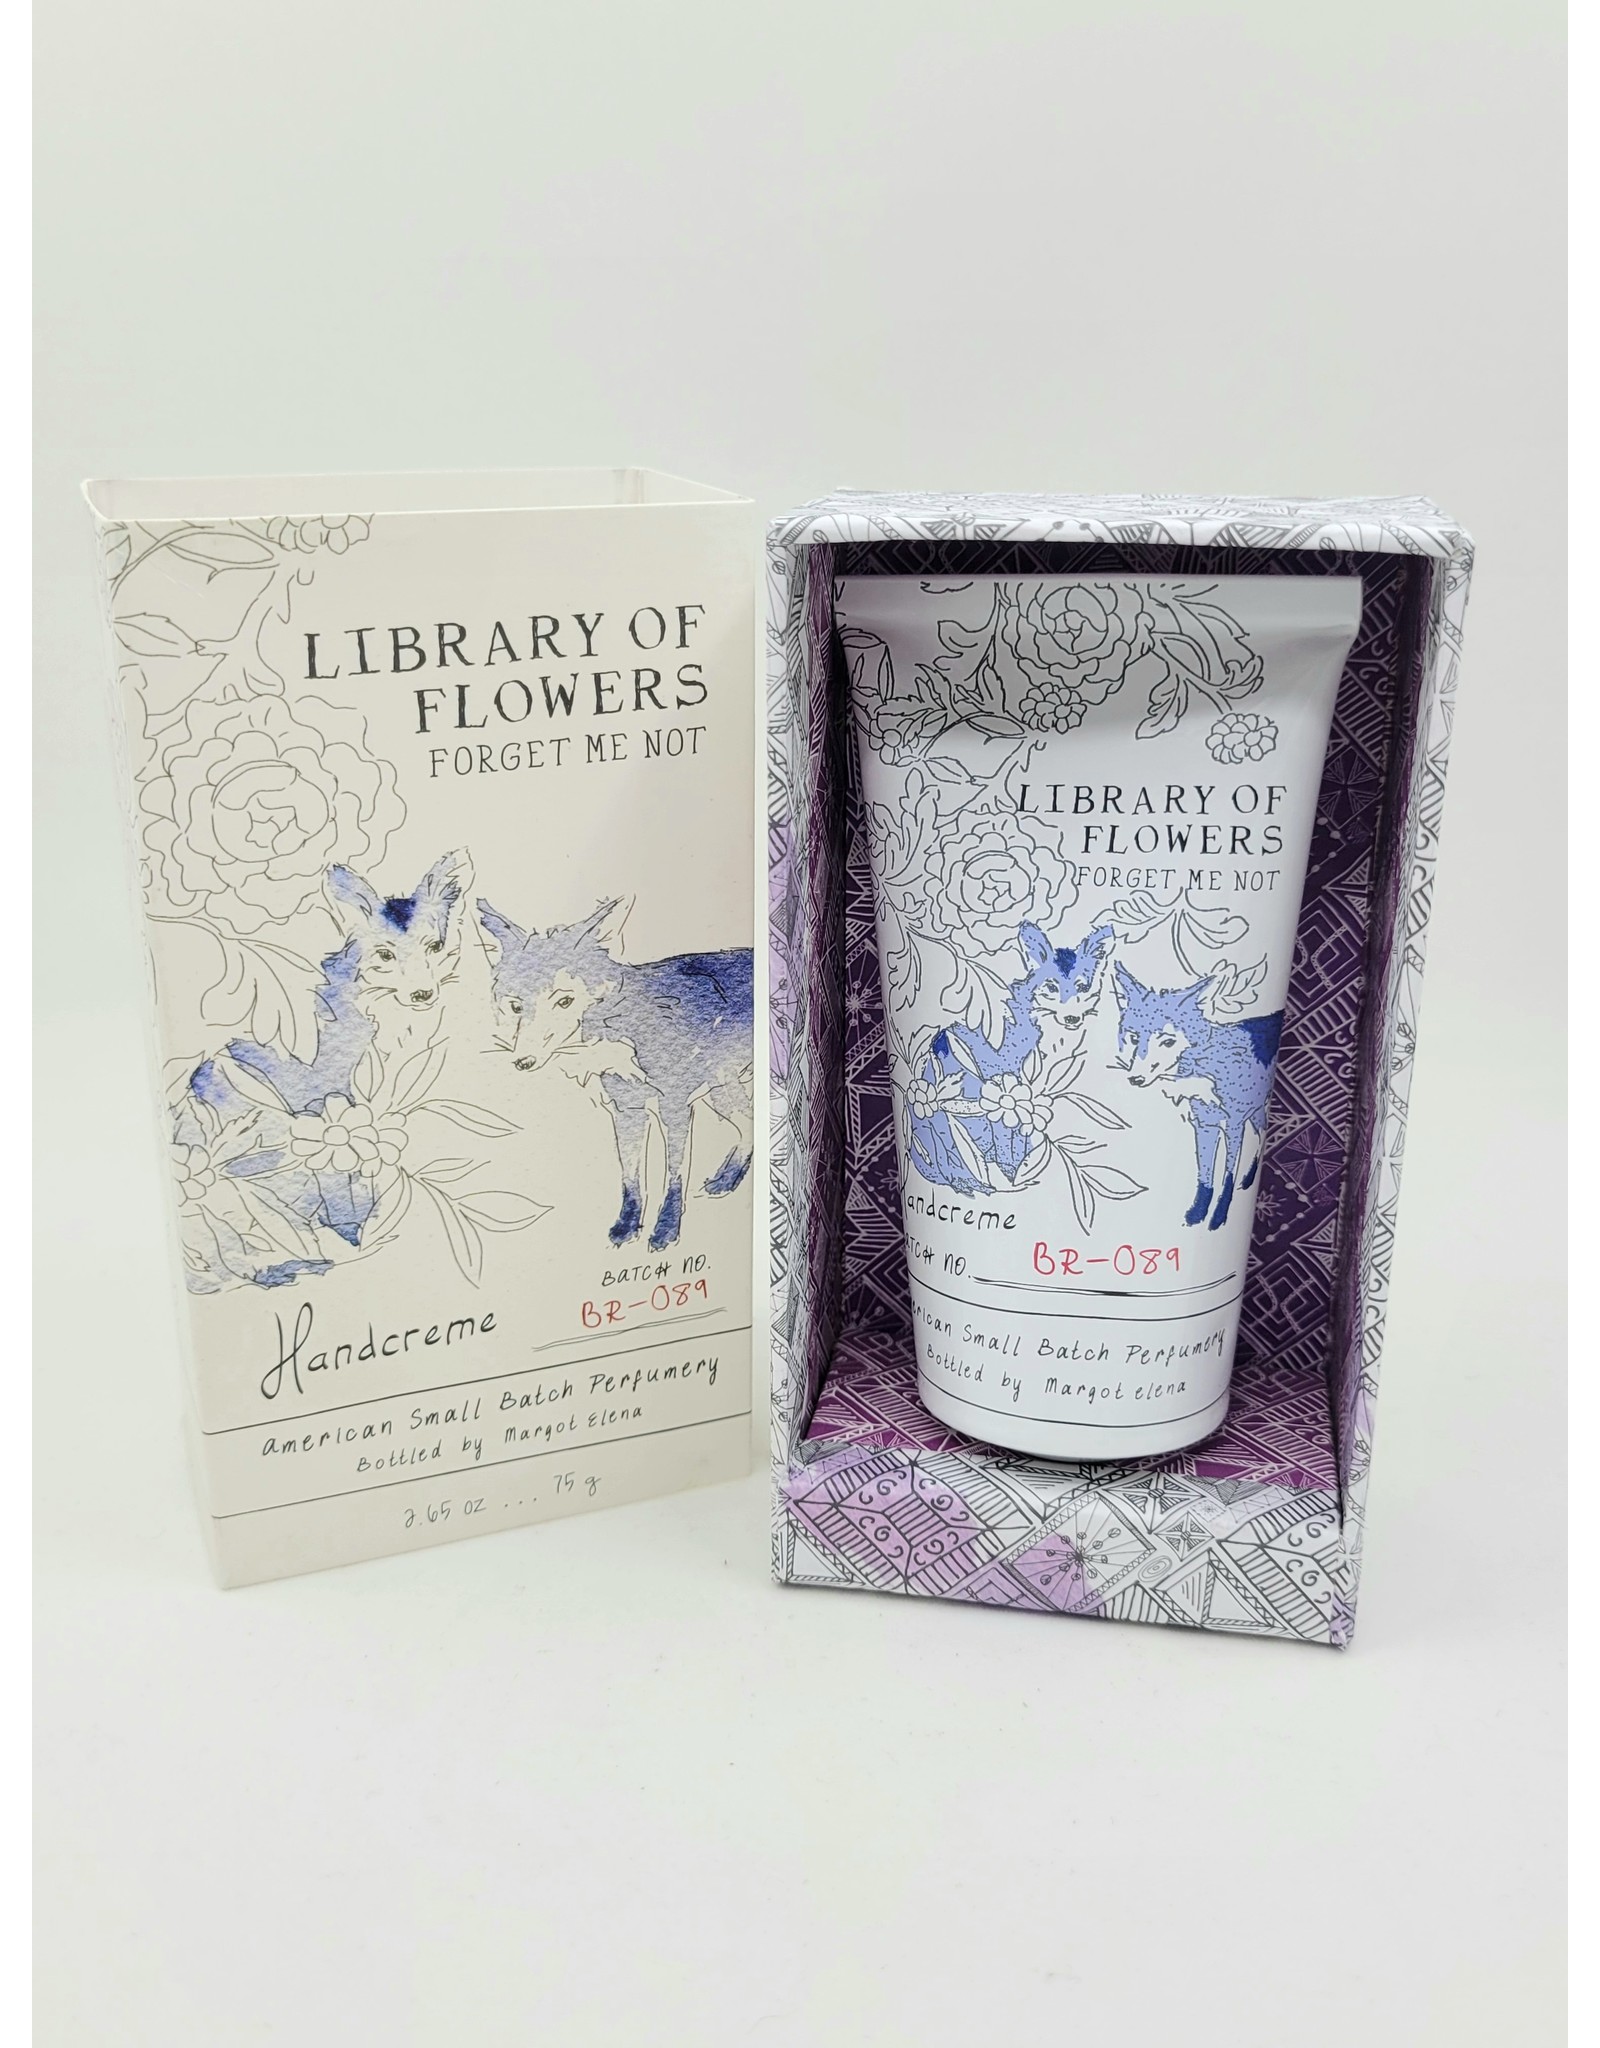 Library of Flowers LOF Boxed Handcreme